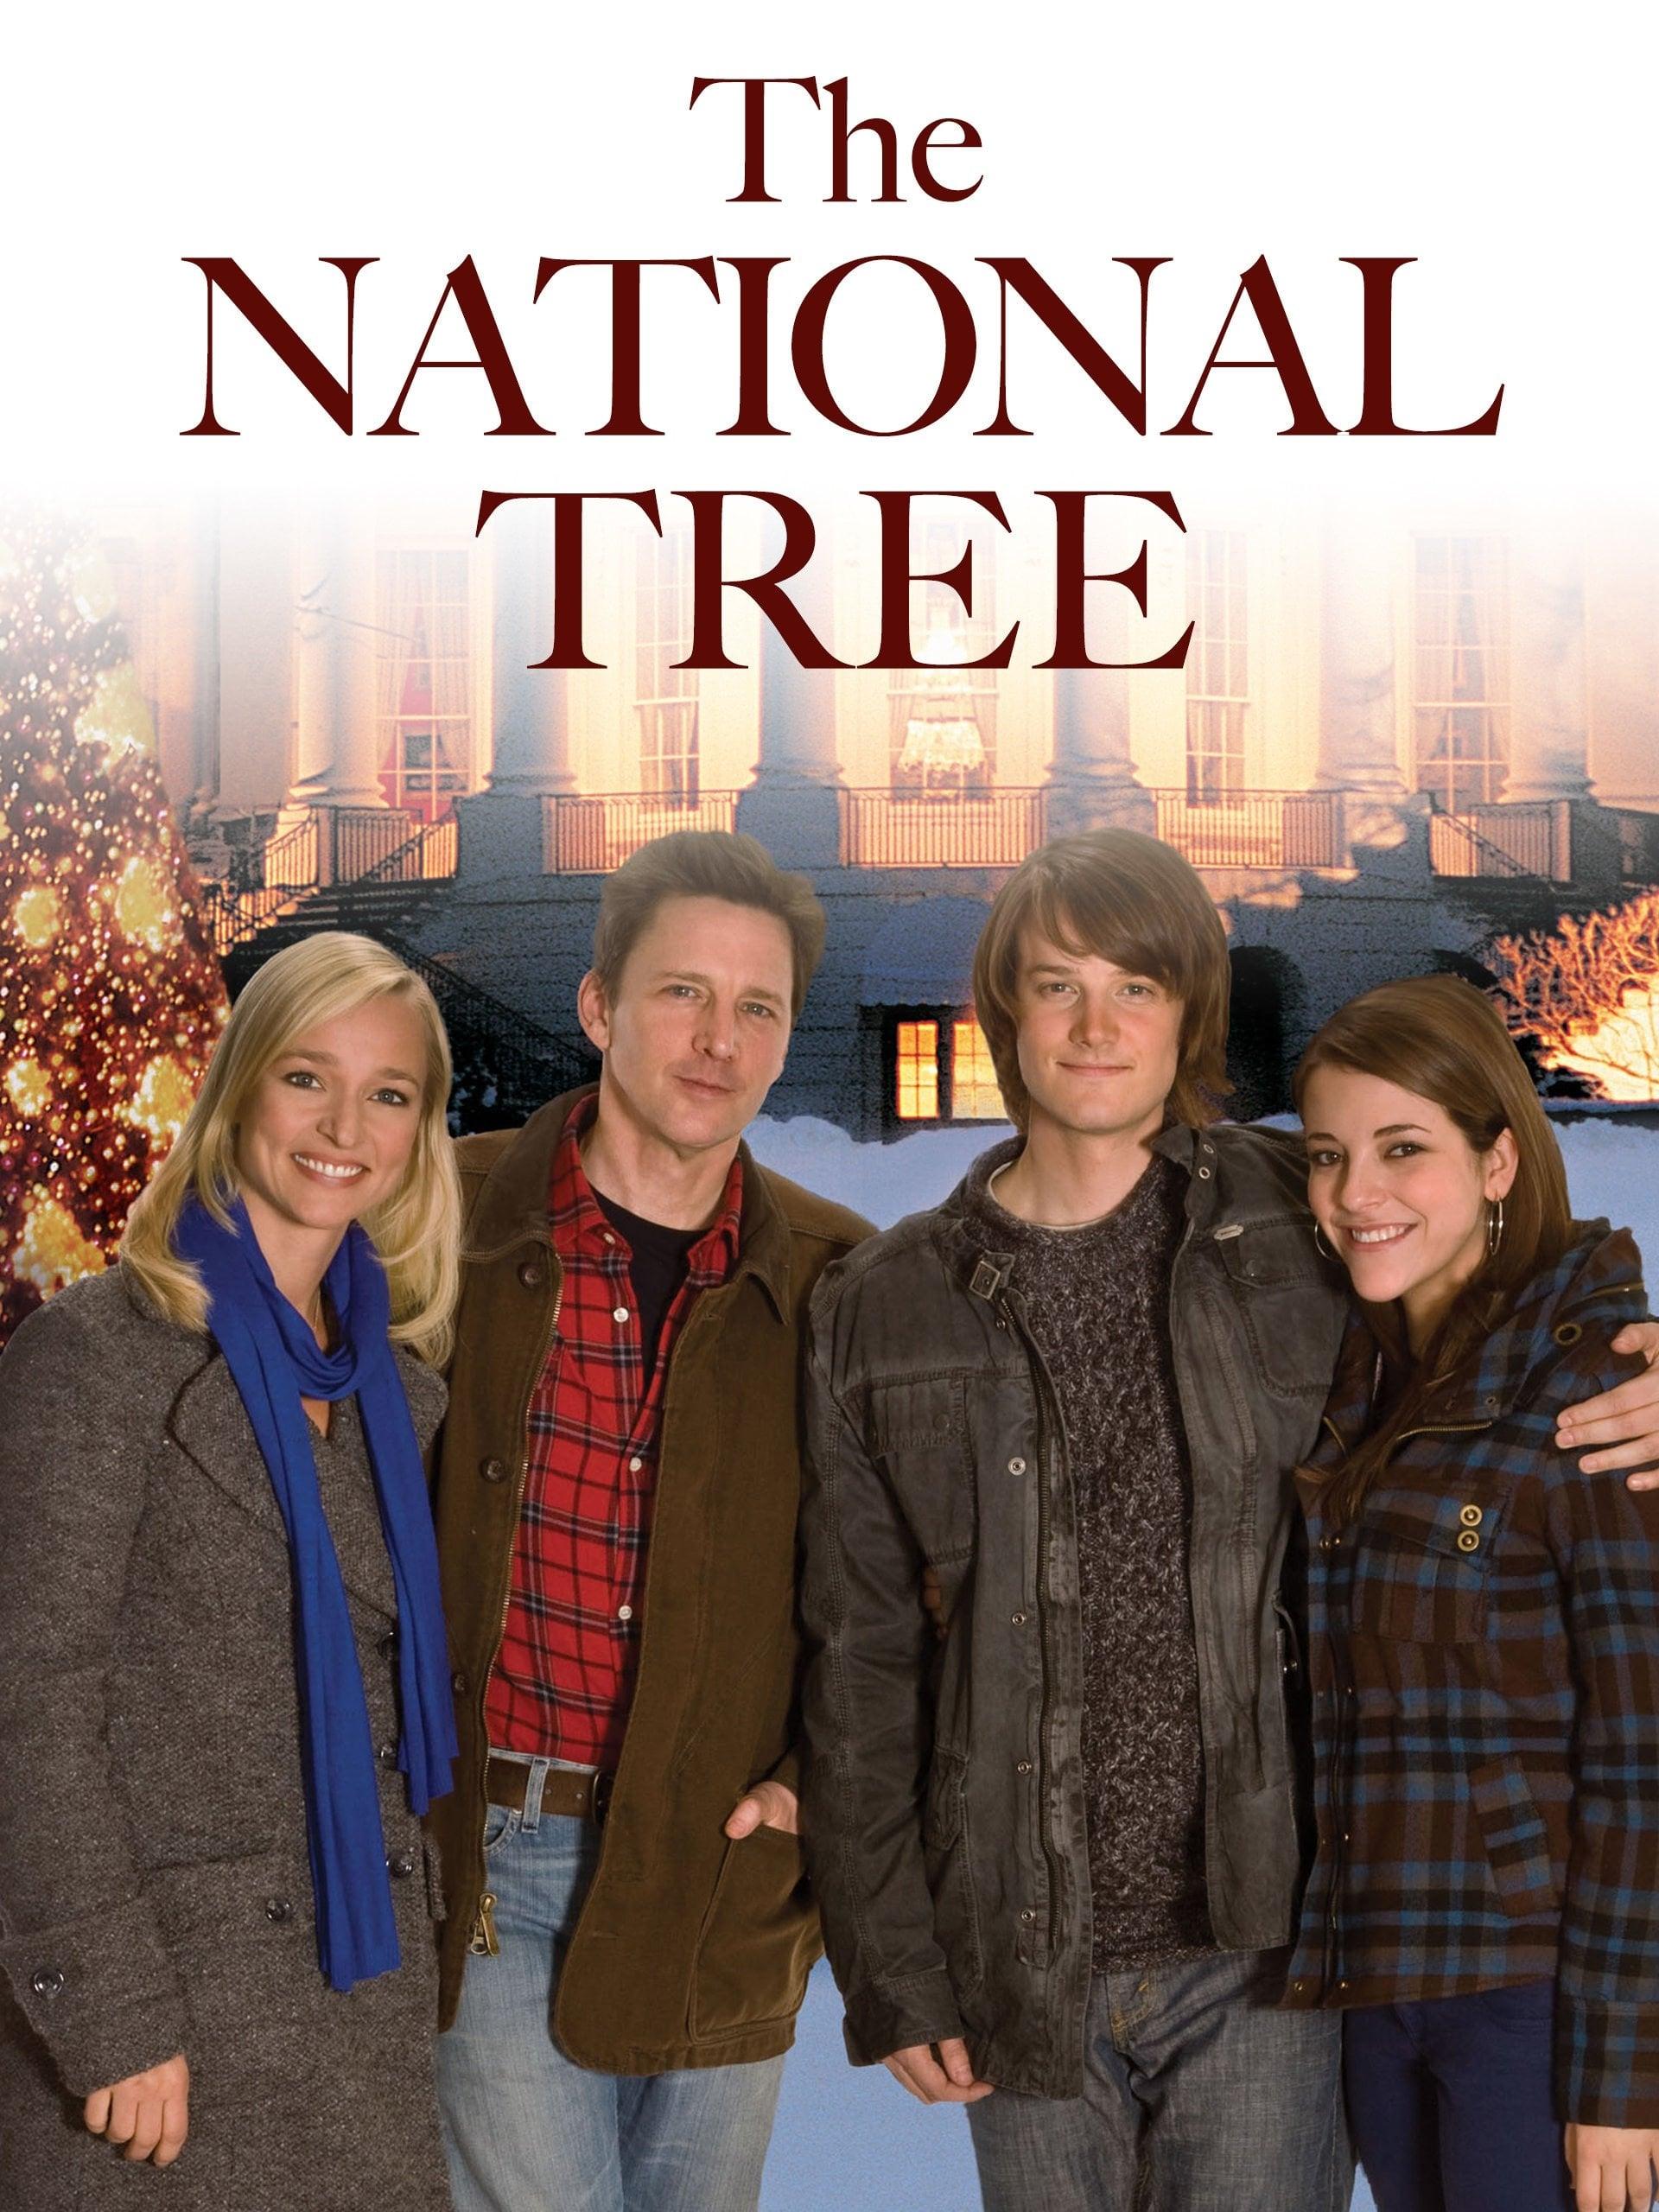 The National Tree poster